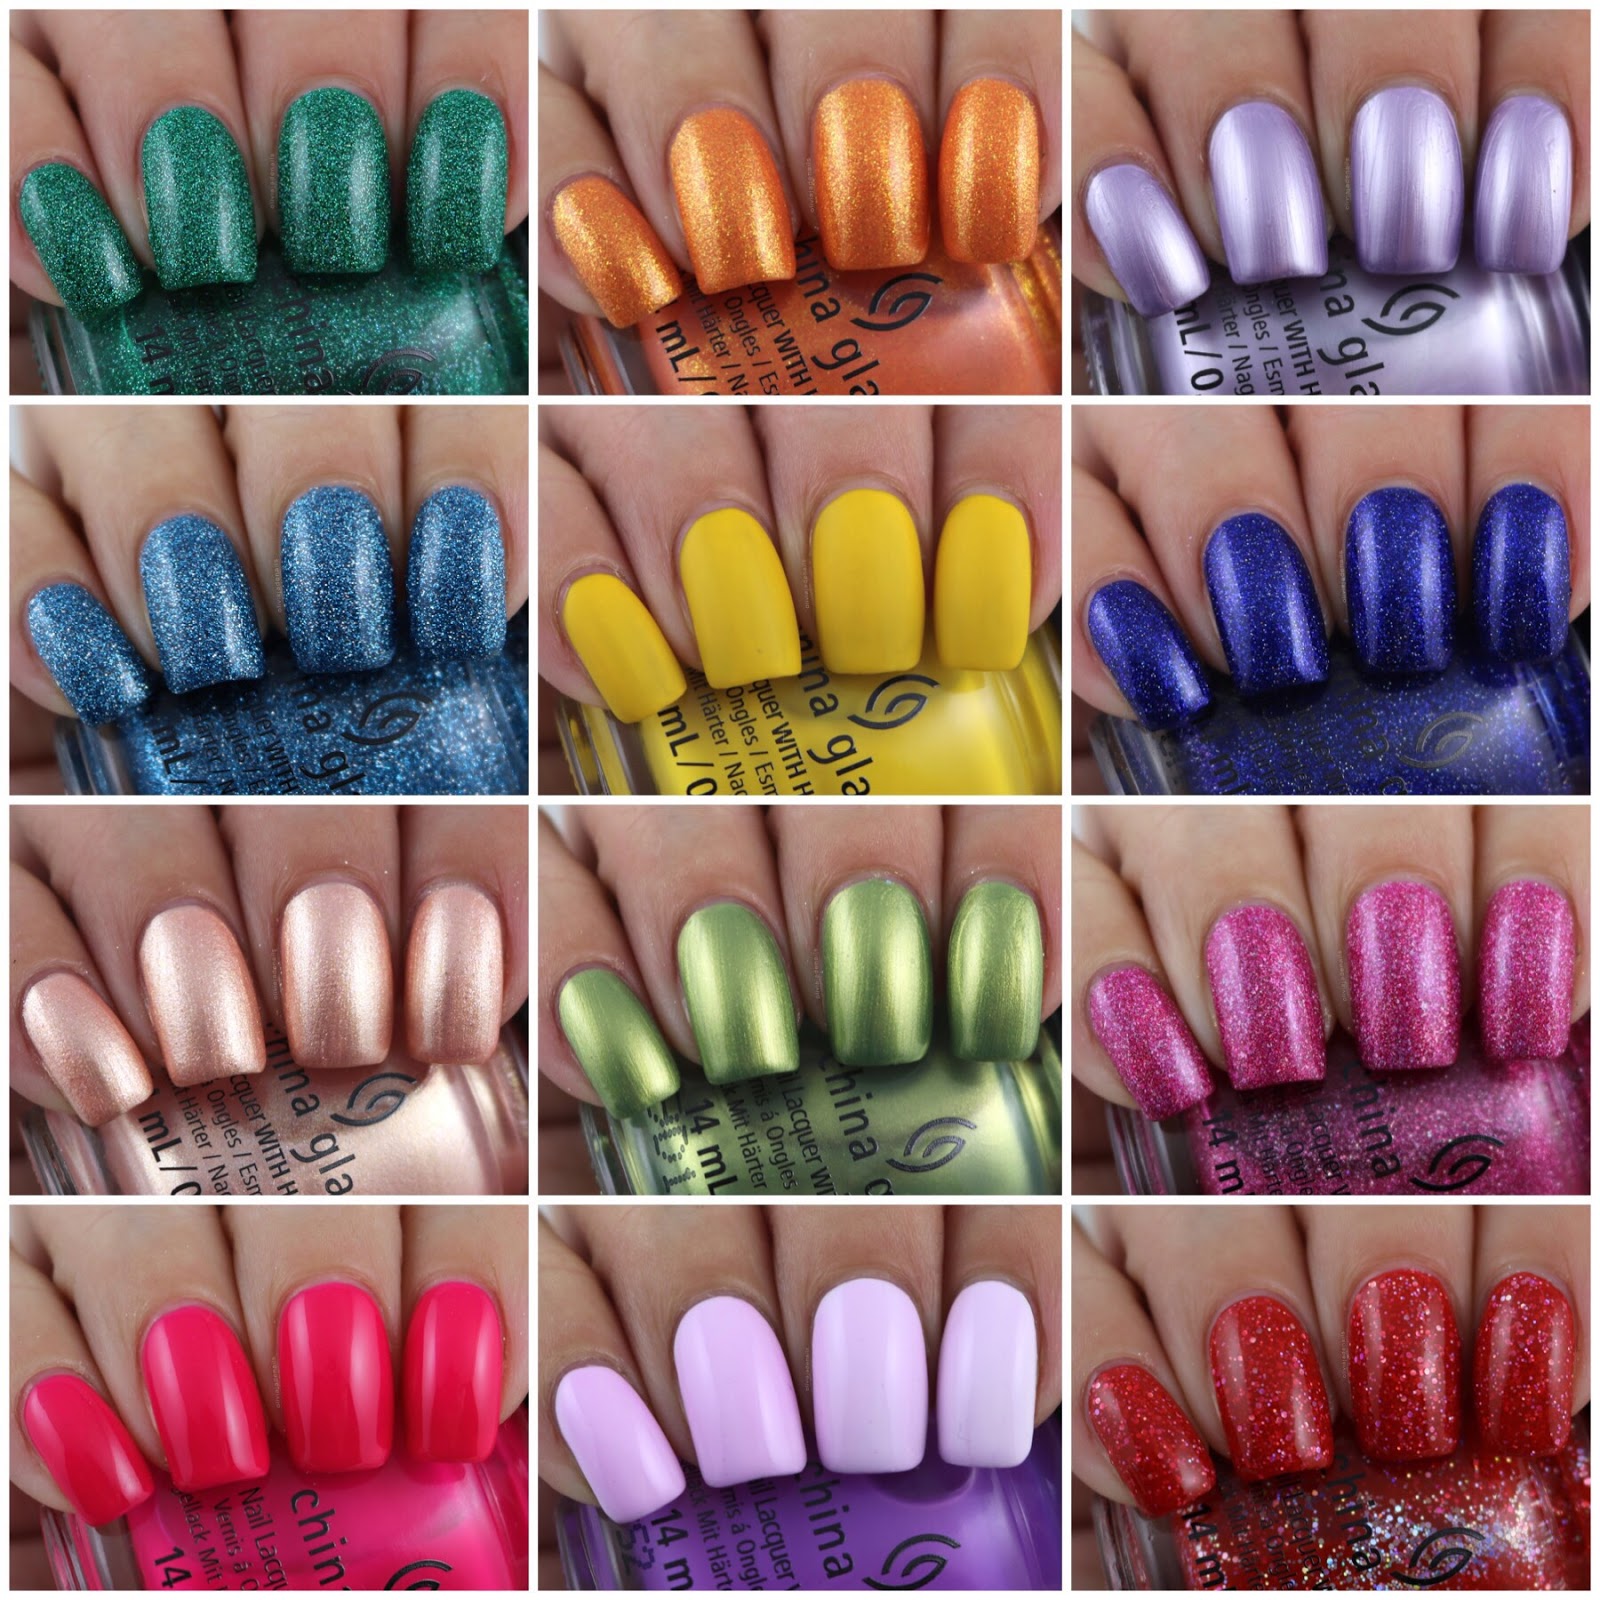 The Polished Hippy: China Glaze OMG Flashback Collection Swatches and Review